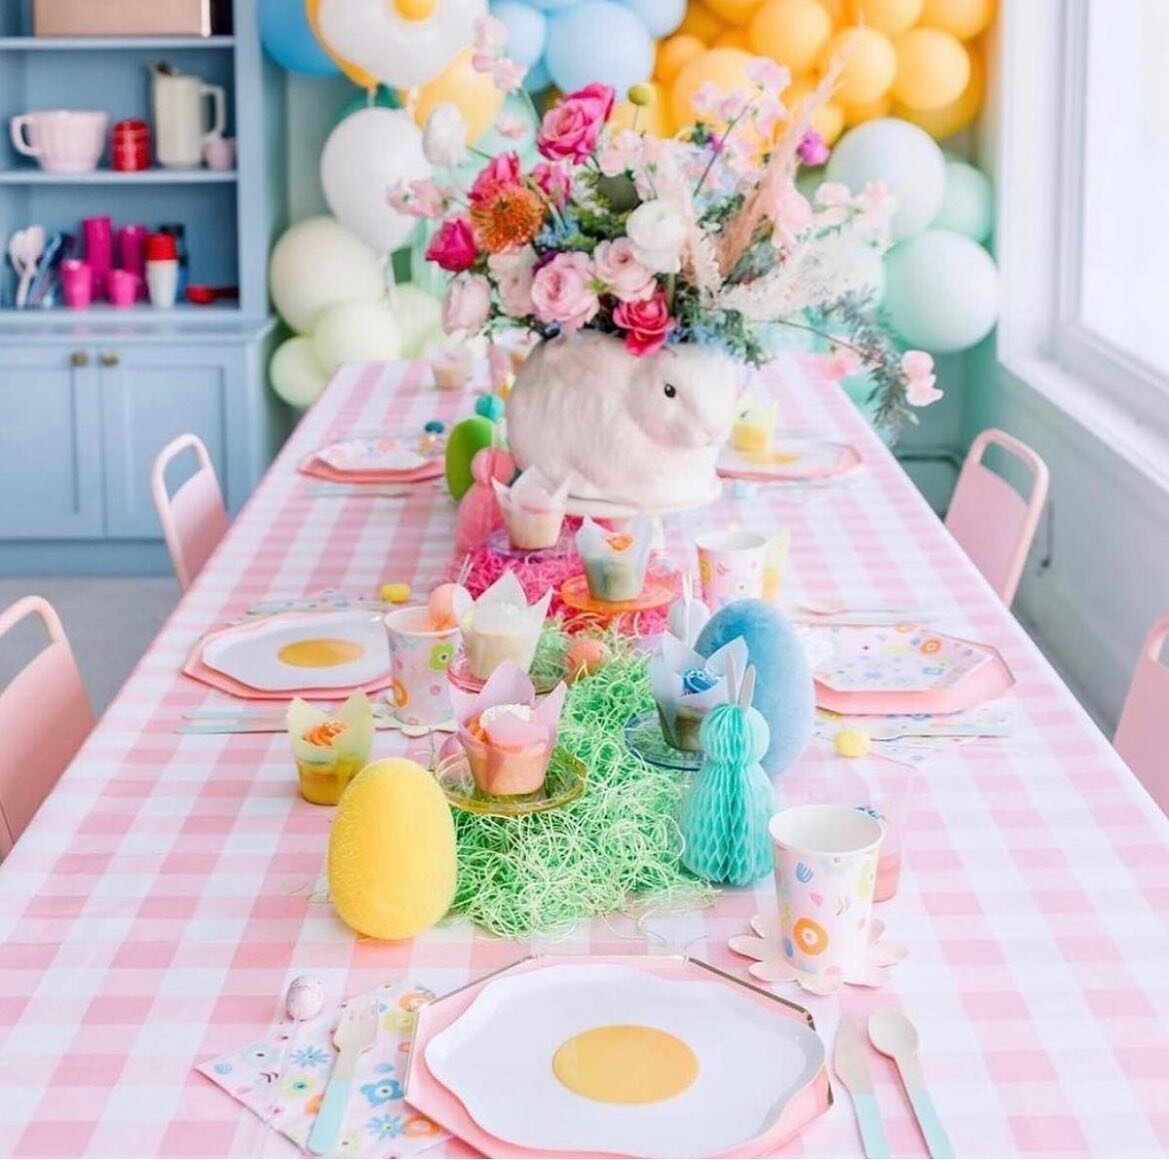 How cute is this Easter tablescape by @butfirstparty and @bonjourfete?! It&rsquo;s the egg plates for me 😍

Photos: @simplyadriphoto 
Cake: @buttercakeshoppe 
Florals: @gratitudecollab 

.
.
.

#creative #eventstylist #luxurypicnic #dfw #dinnerparty